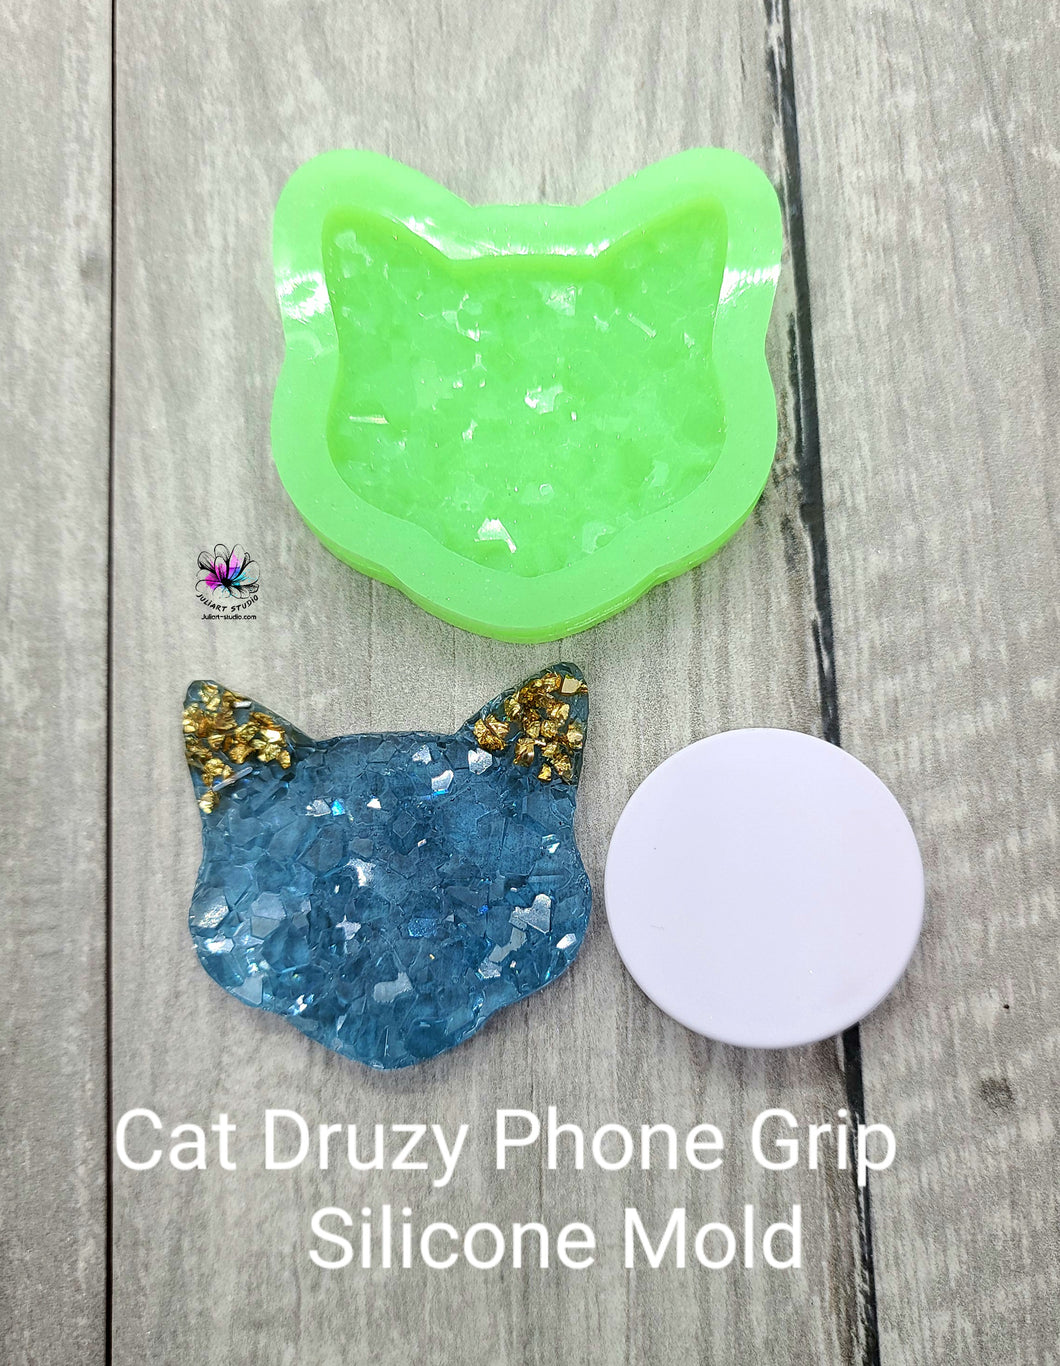 2.25 inch Cat Druzy Phone Grip Silicone Mold for Resin